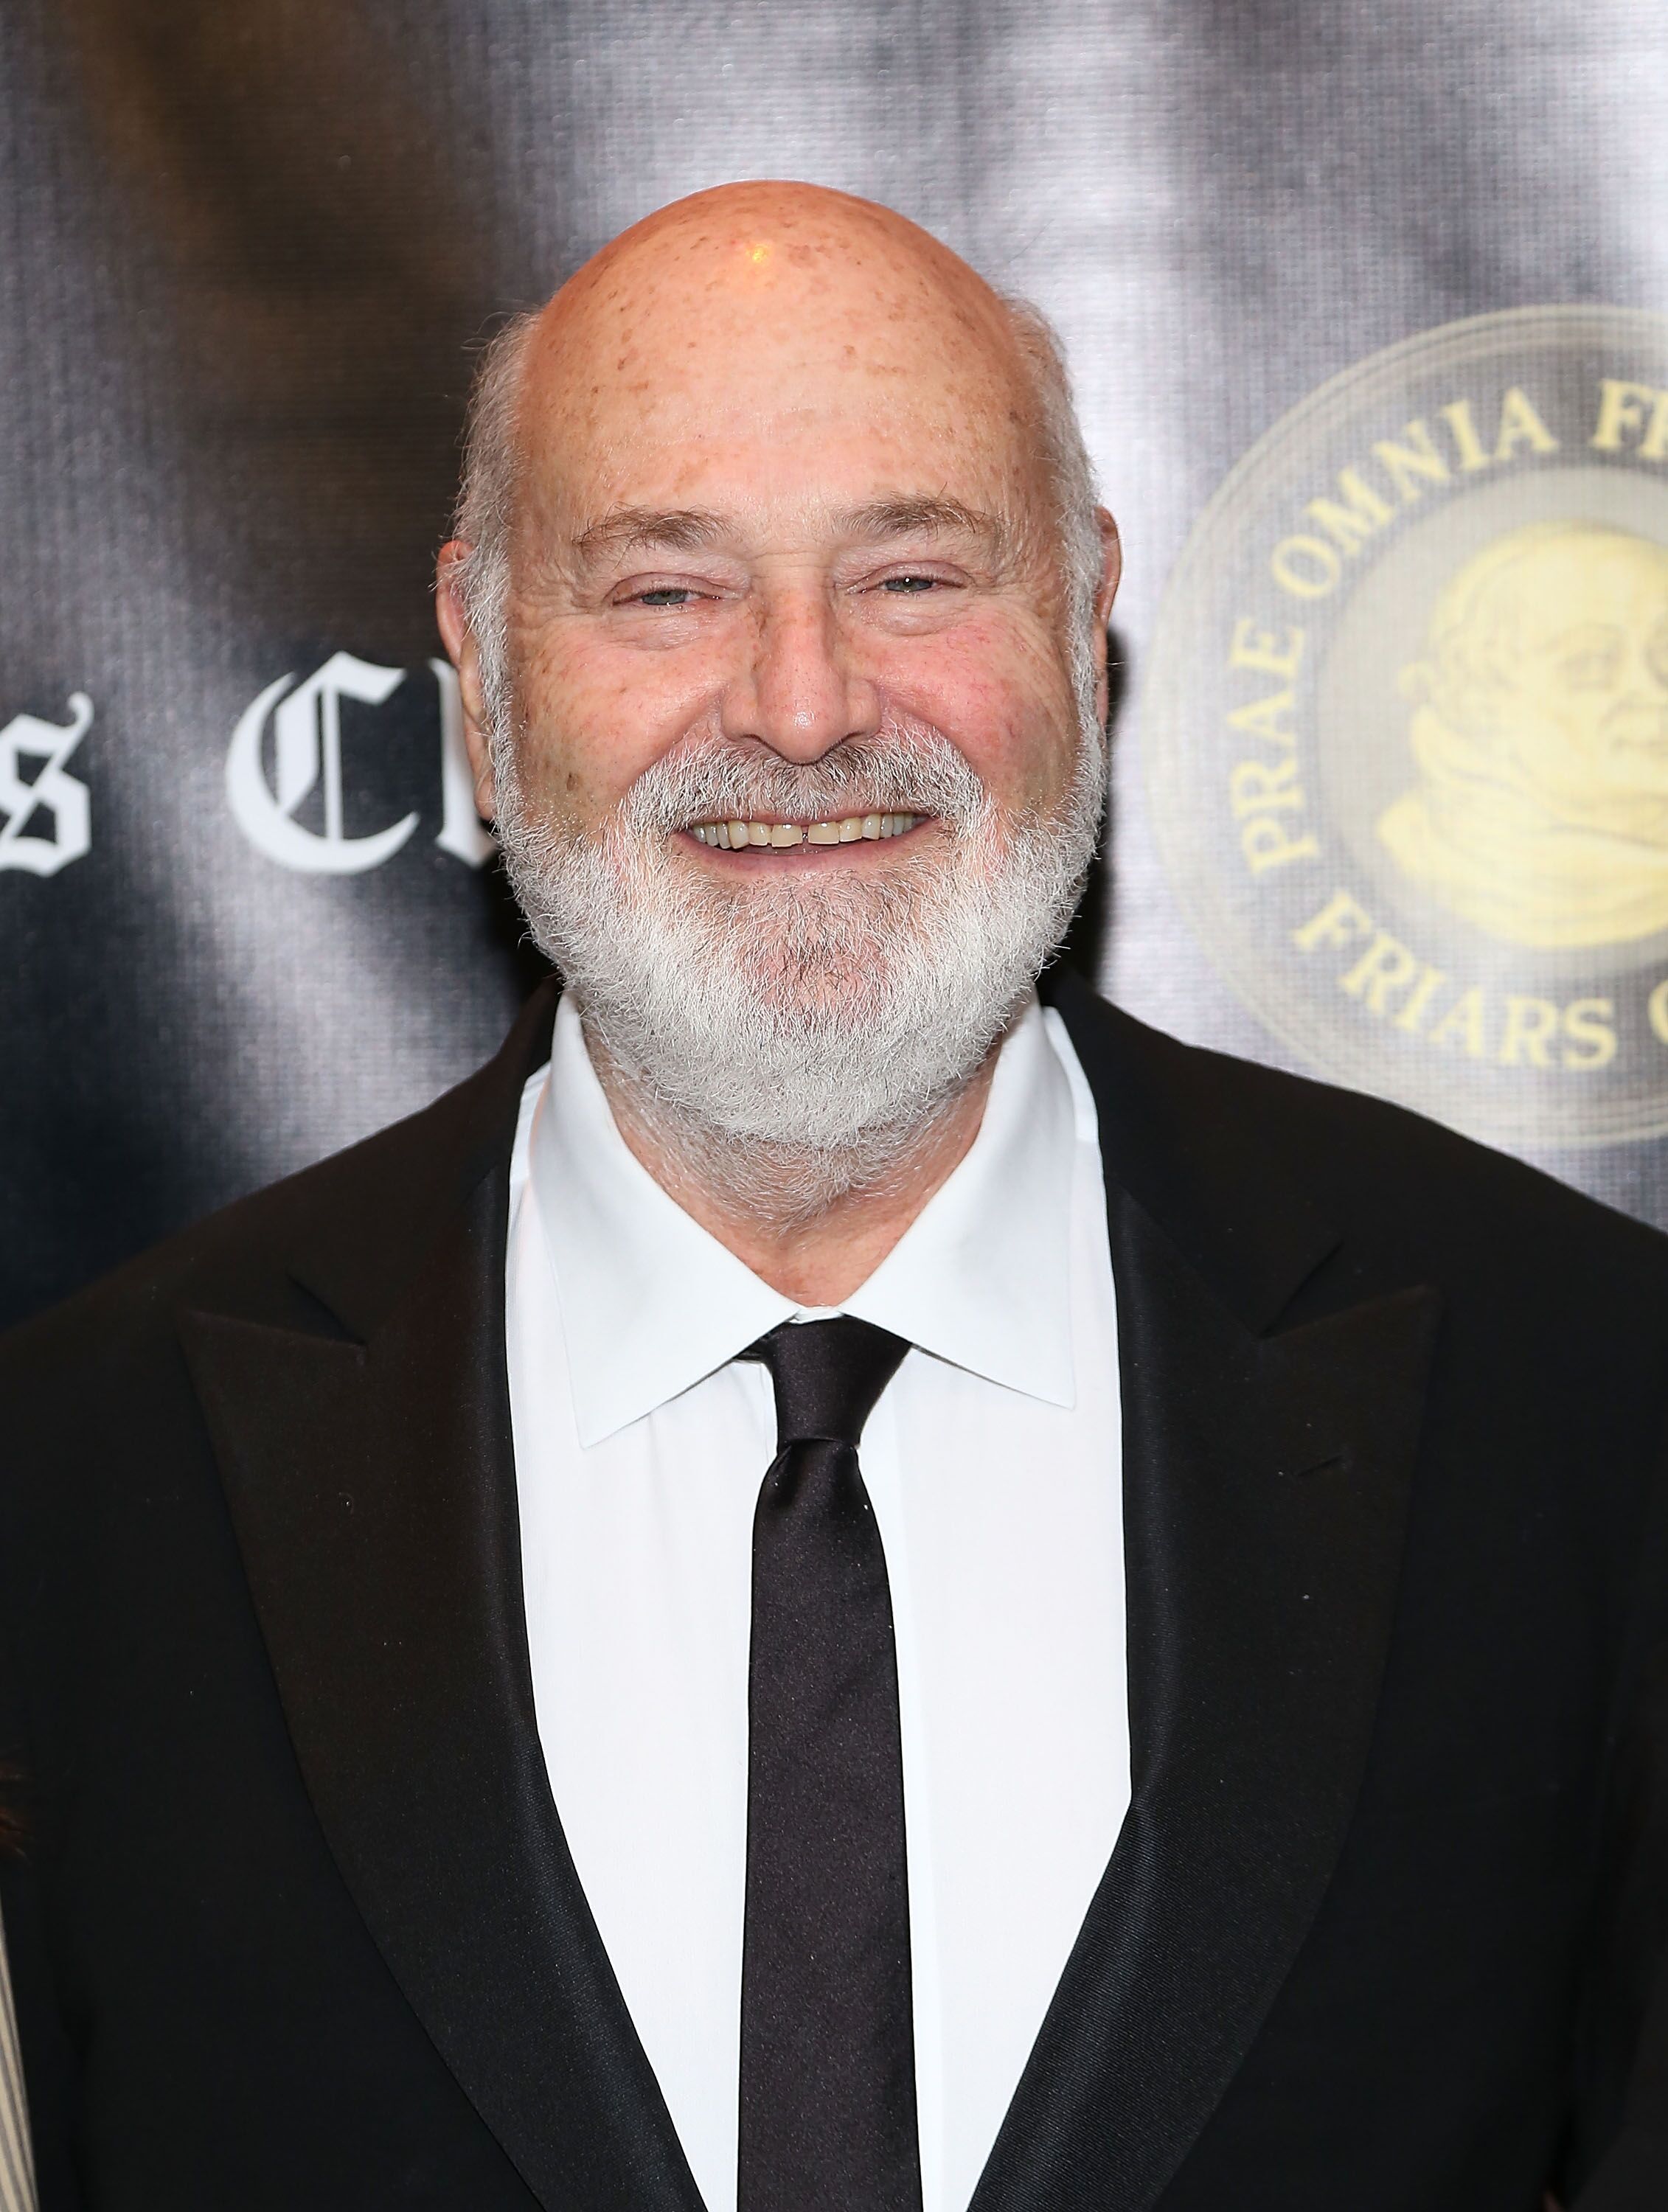 Rob Reiner at the Friar's Club Entertainment Icon Award on November 12, 2018. | Photo: Getty Images